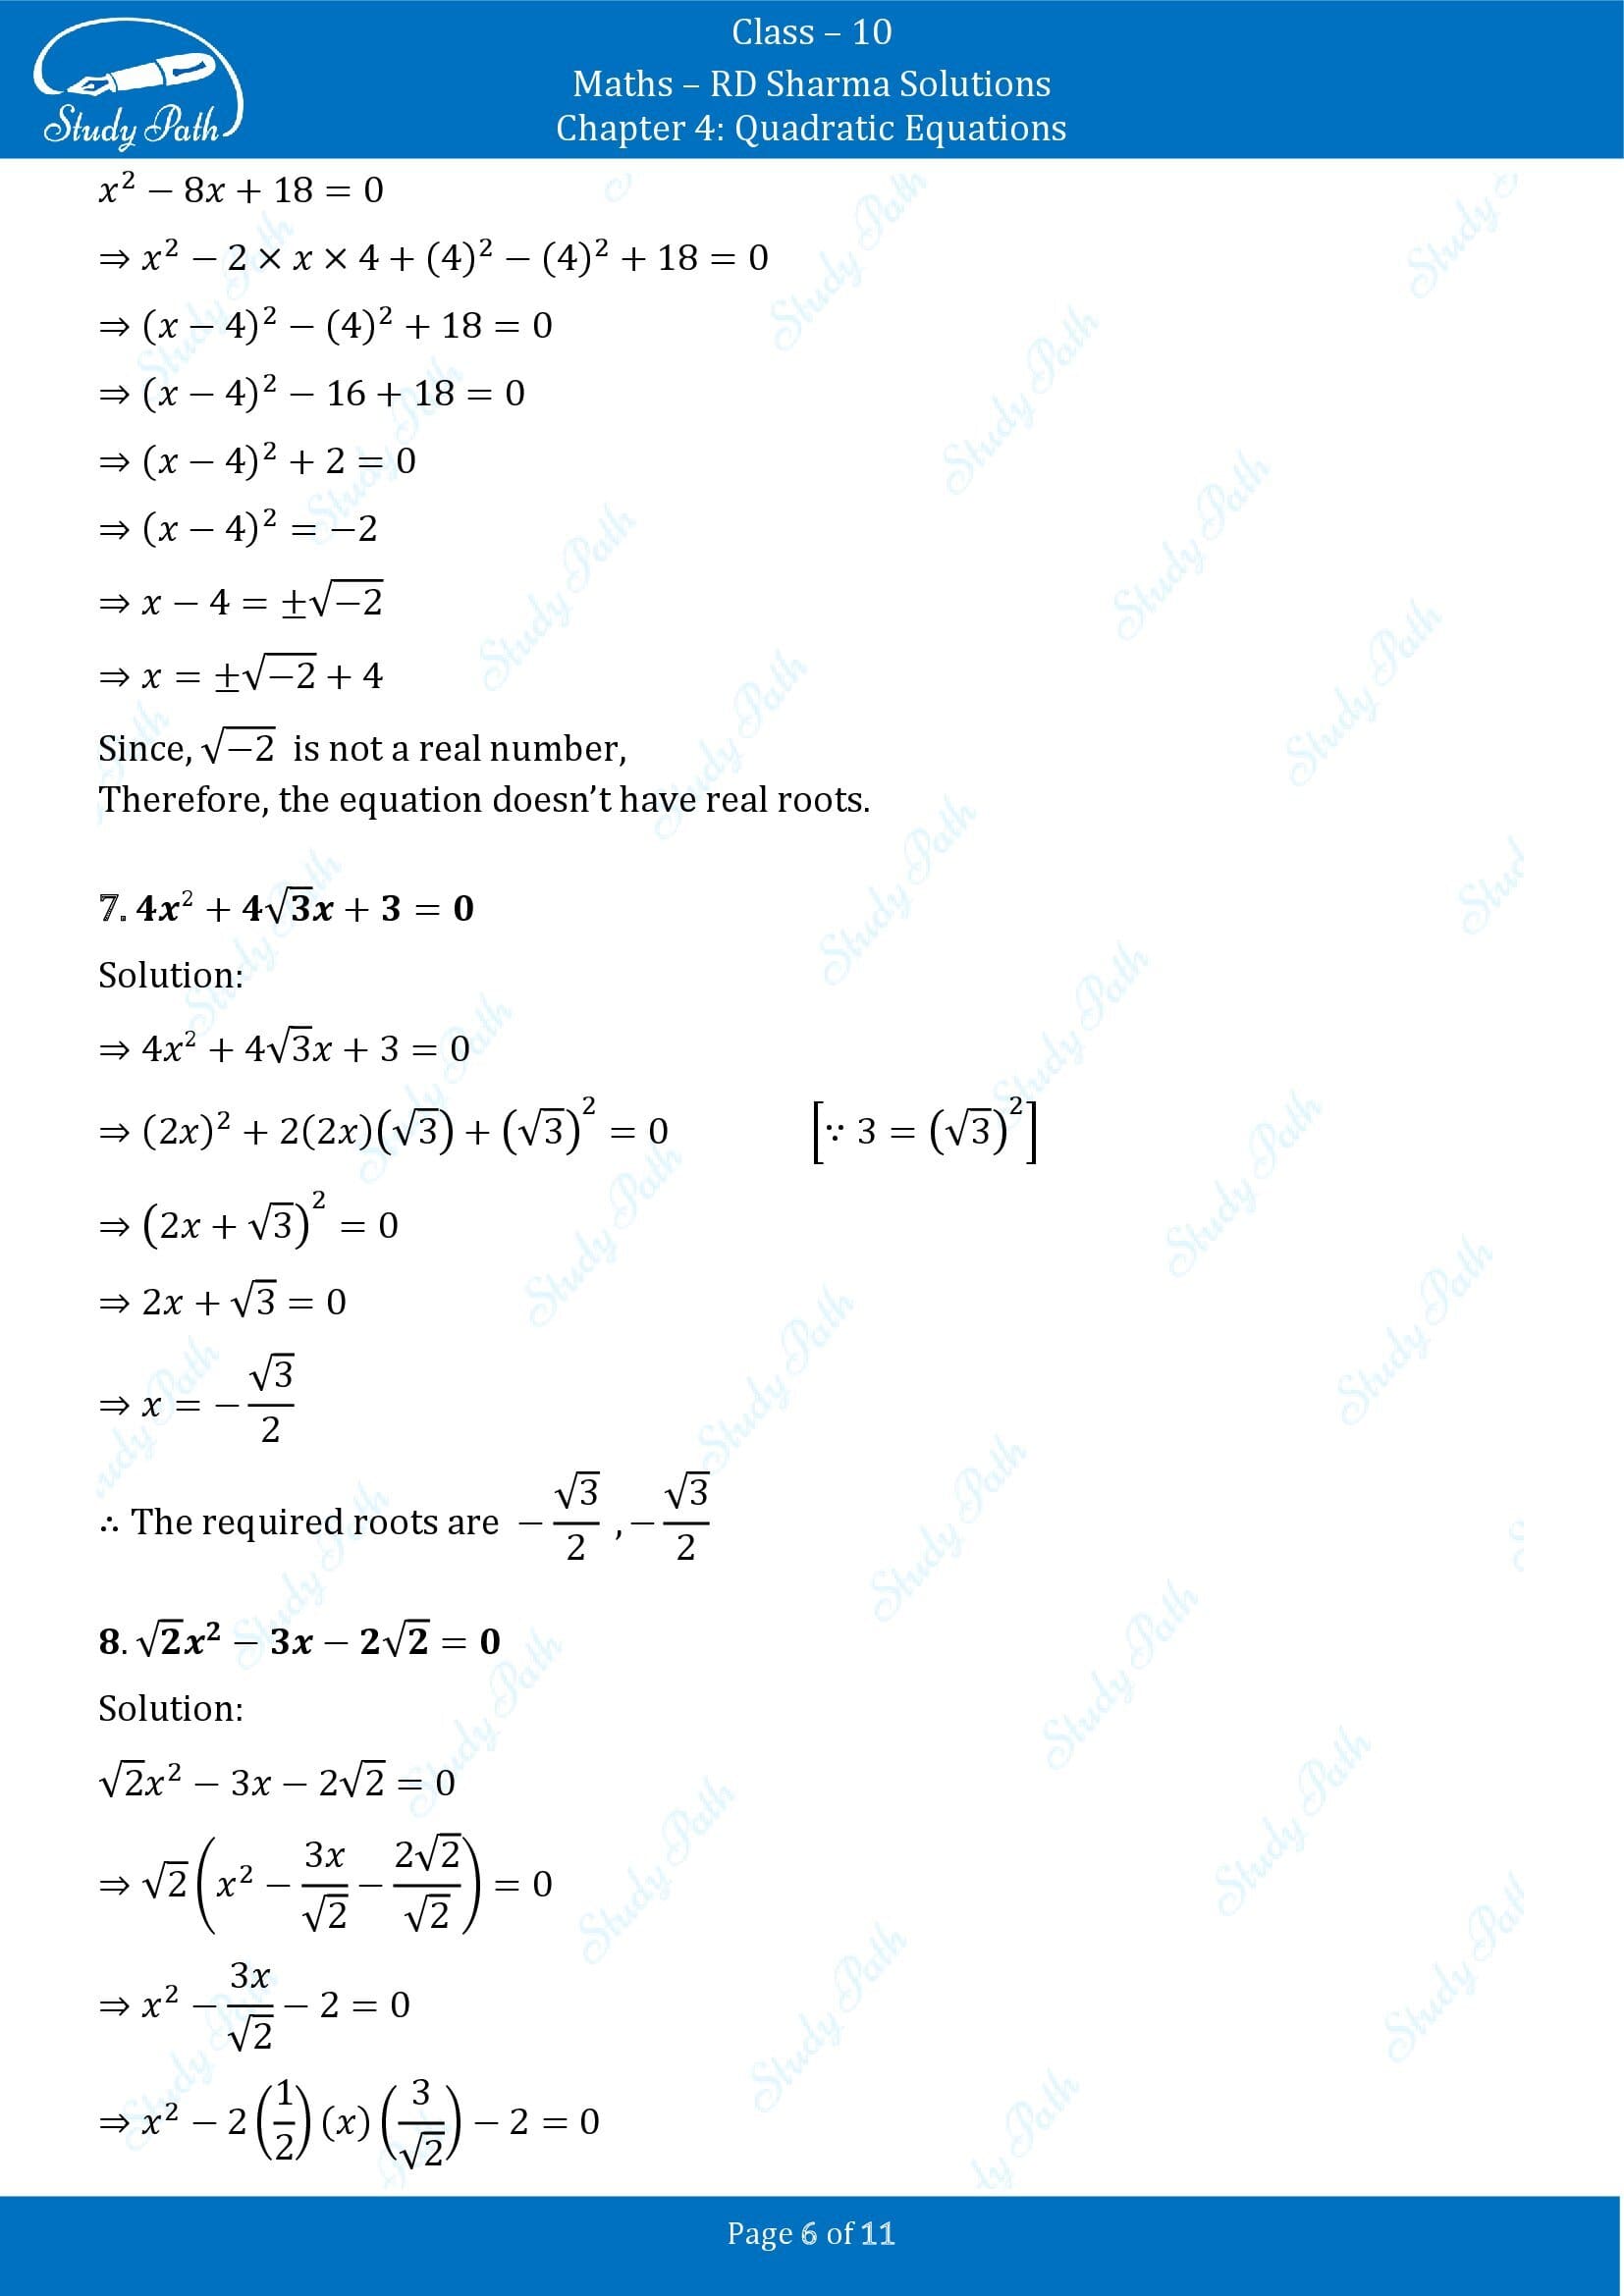 RD Sharma Solutions Class 10 Chapter 4 Quadratic Equations Exercise 4.4 00006